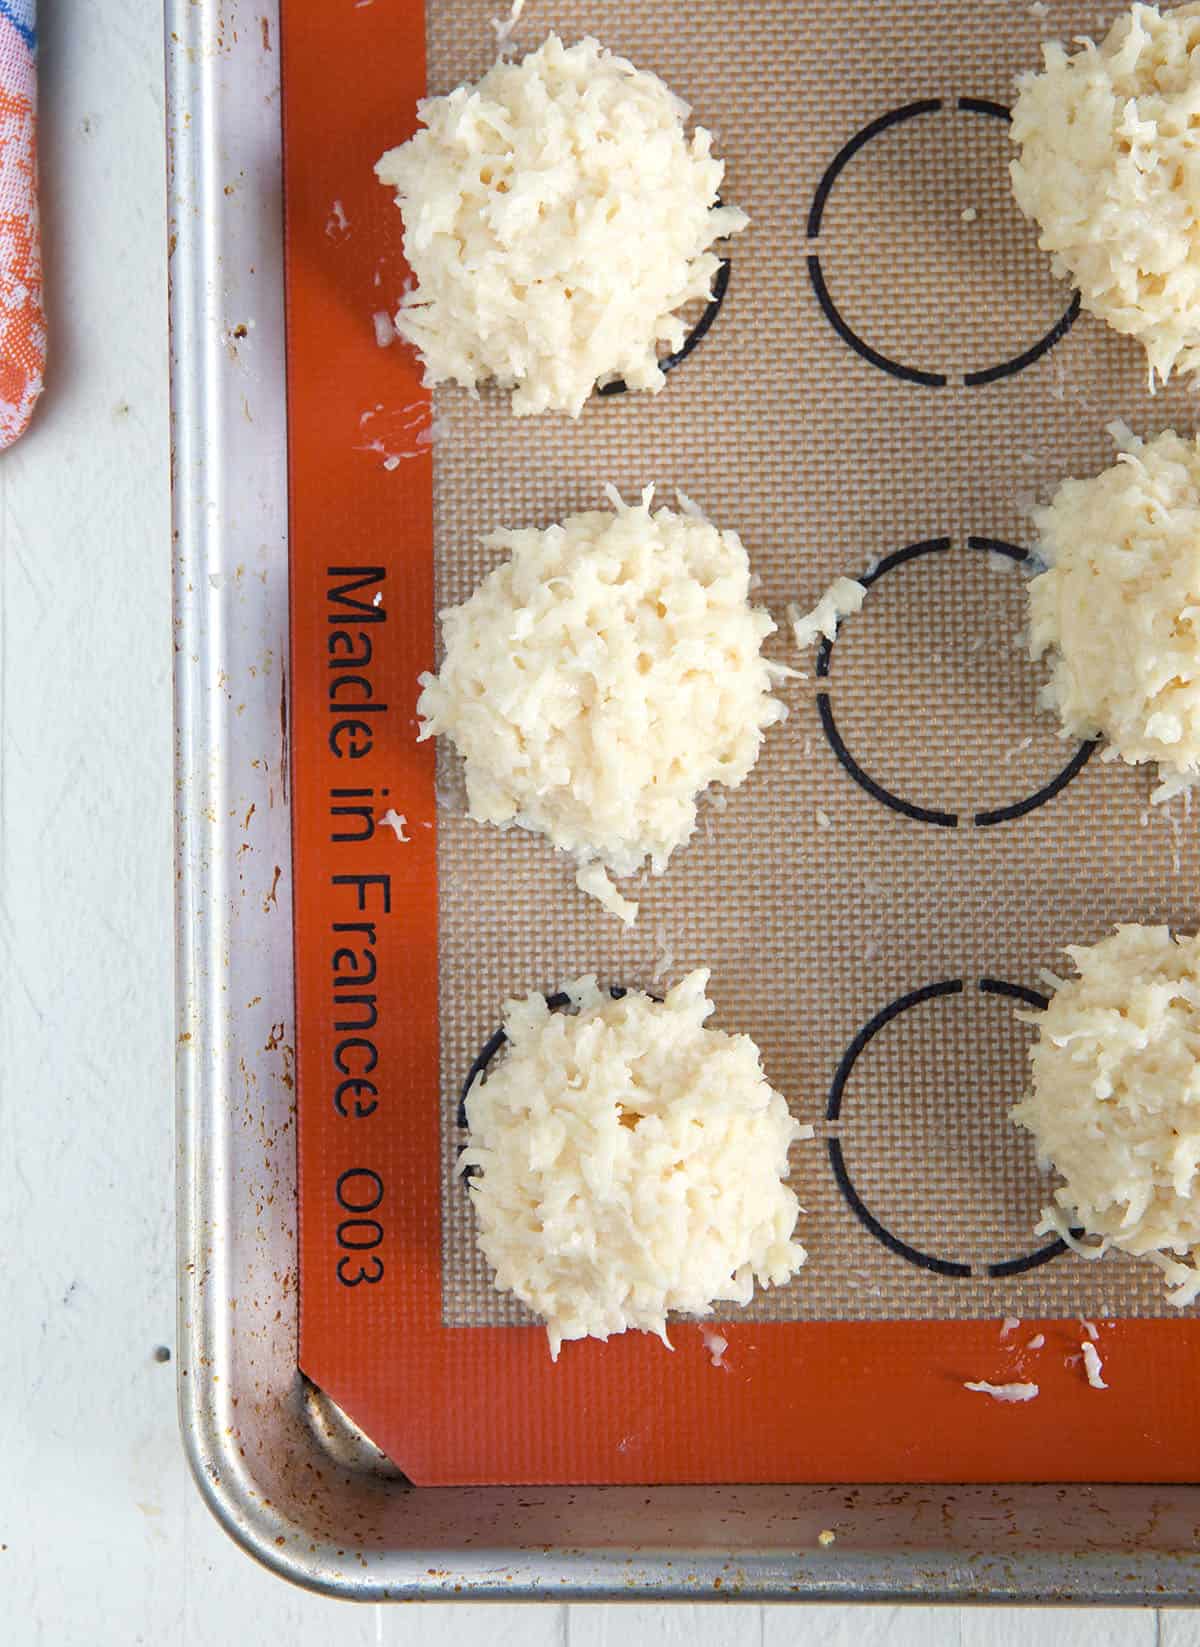 Uncooked macaroons are spread out on a baking sheet.